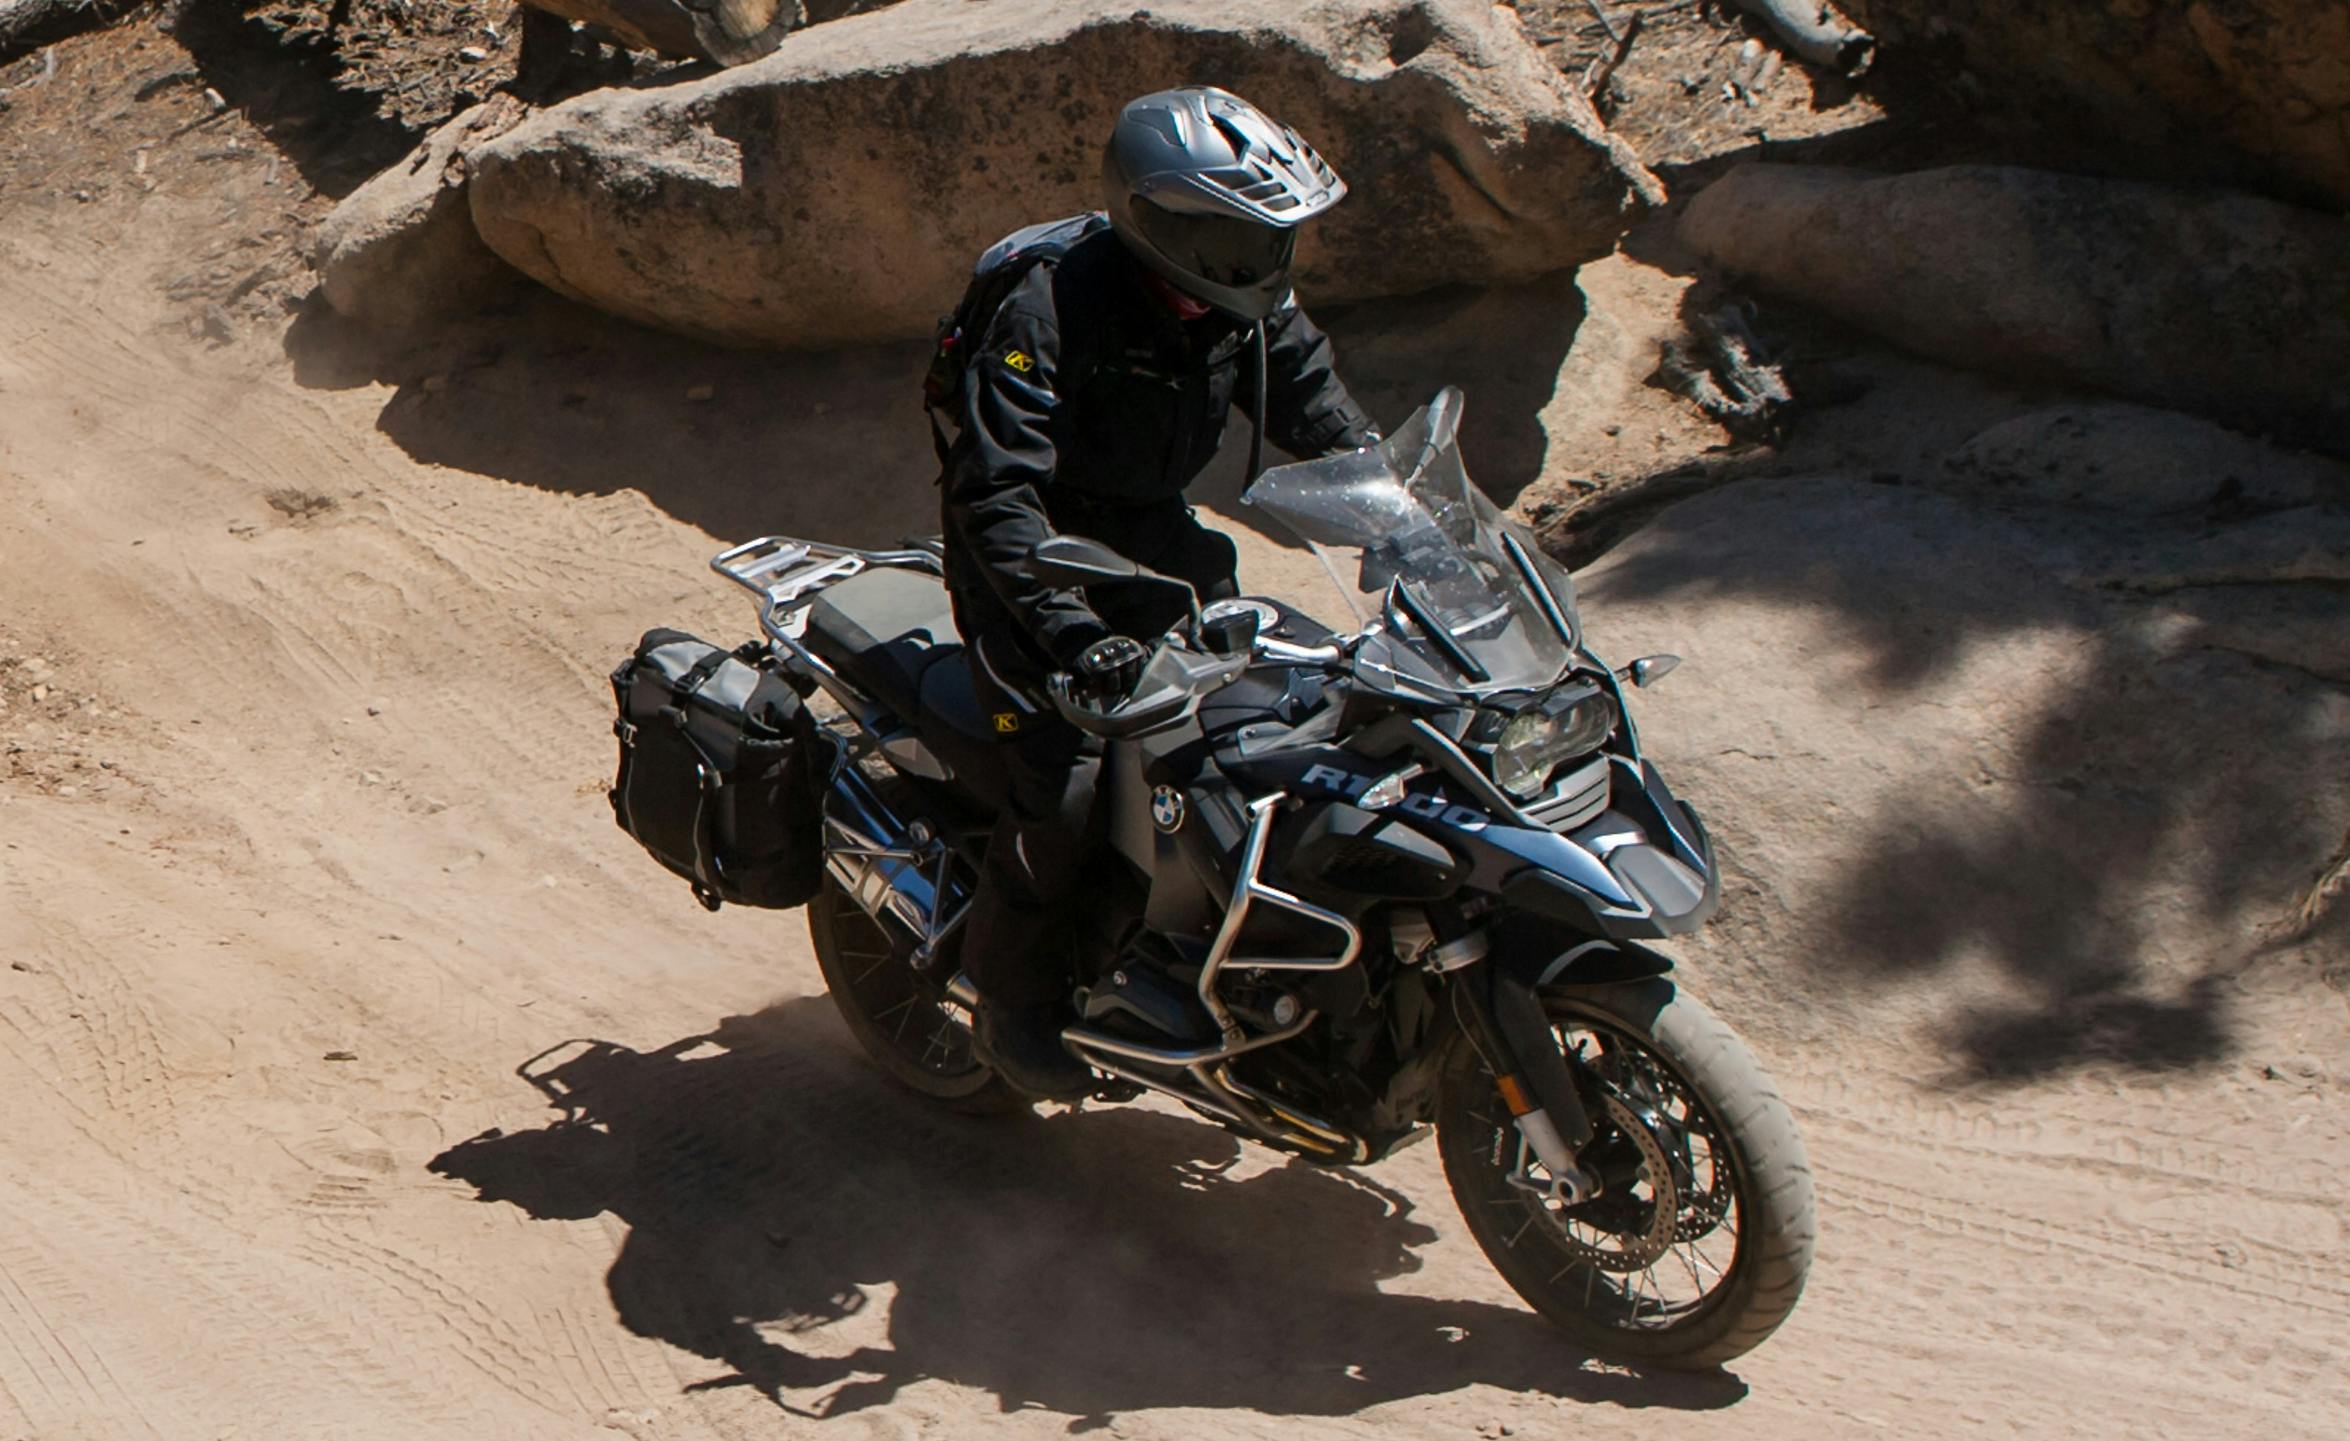 Adventure motorcycle rider on a BMW adventure motorcycle wearing all black protective gear